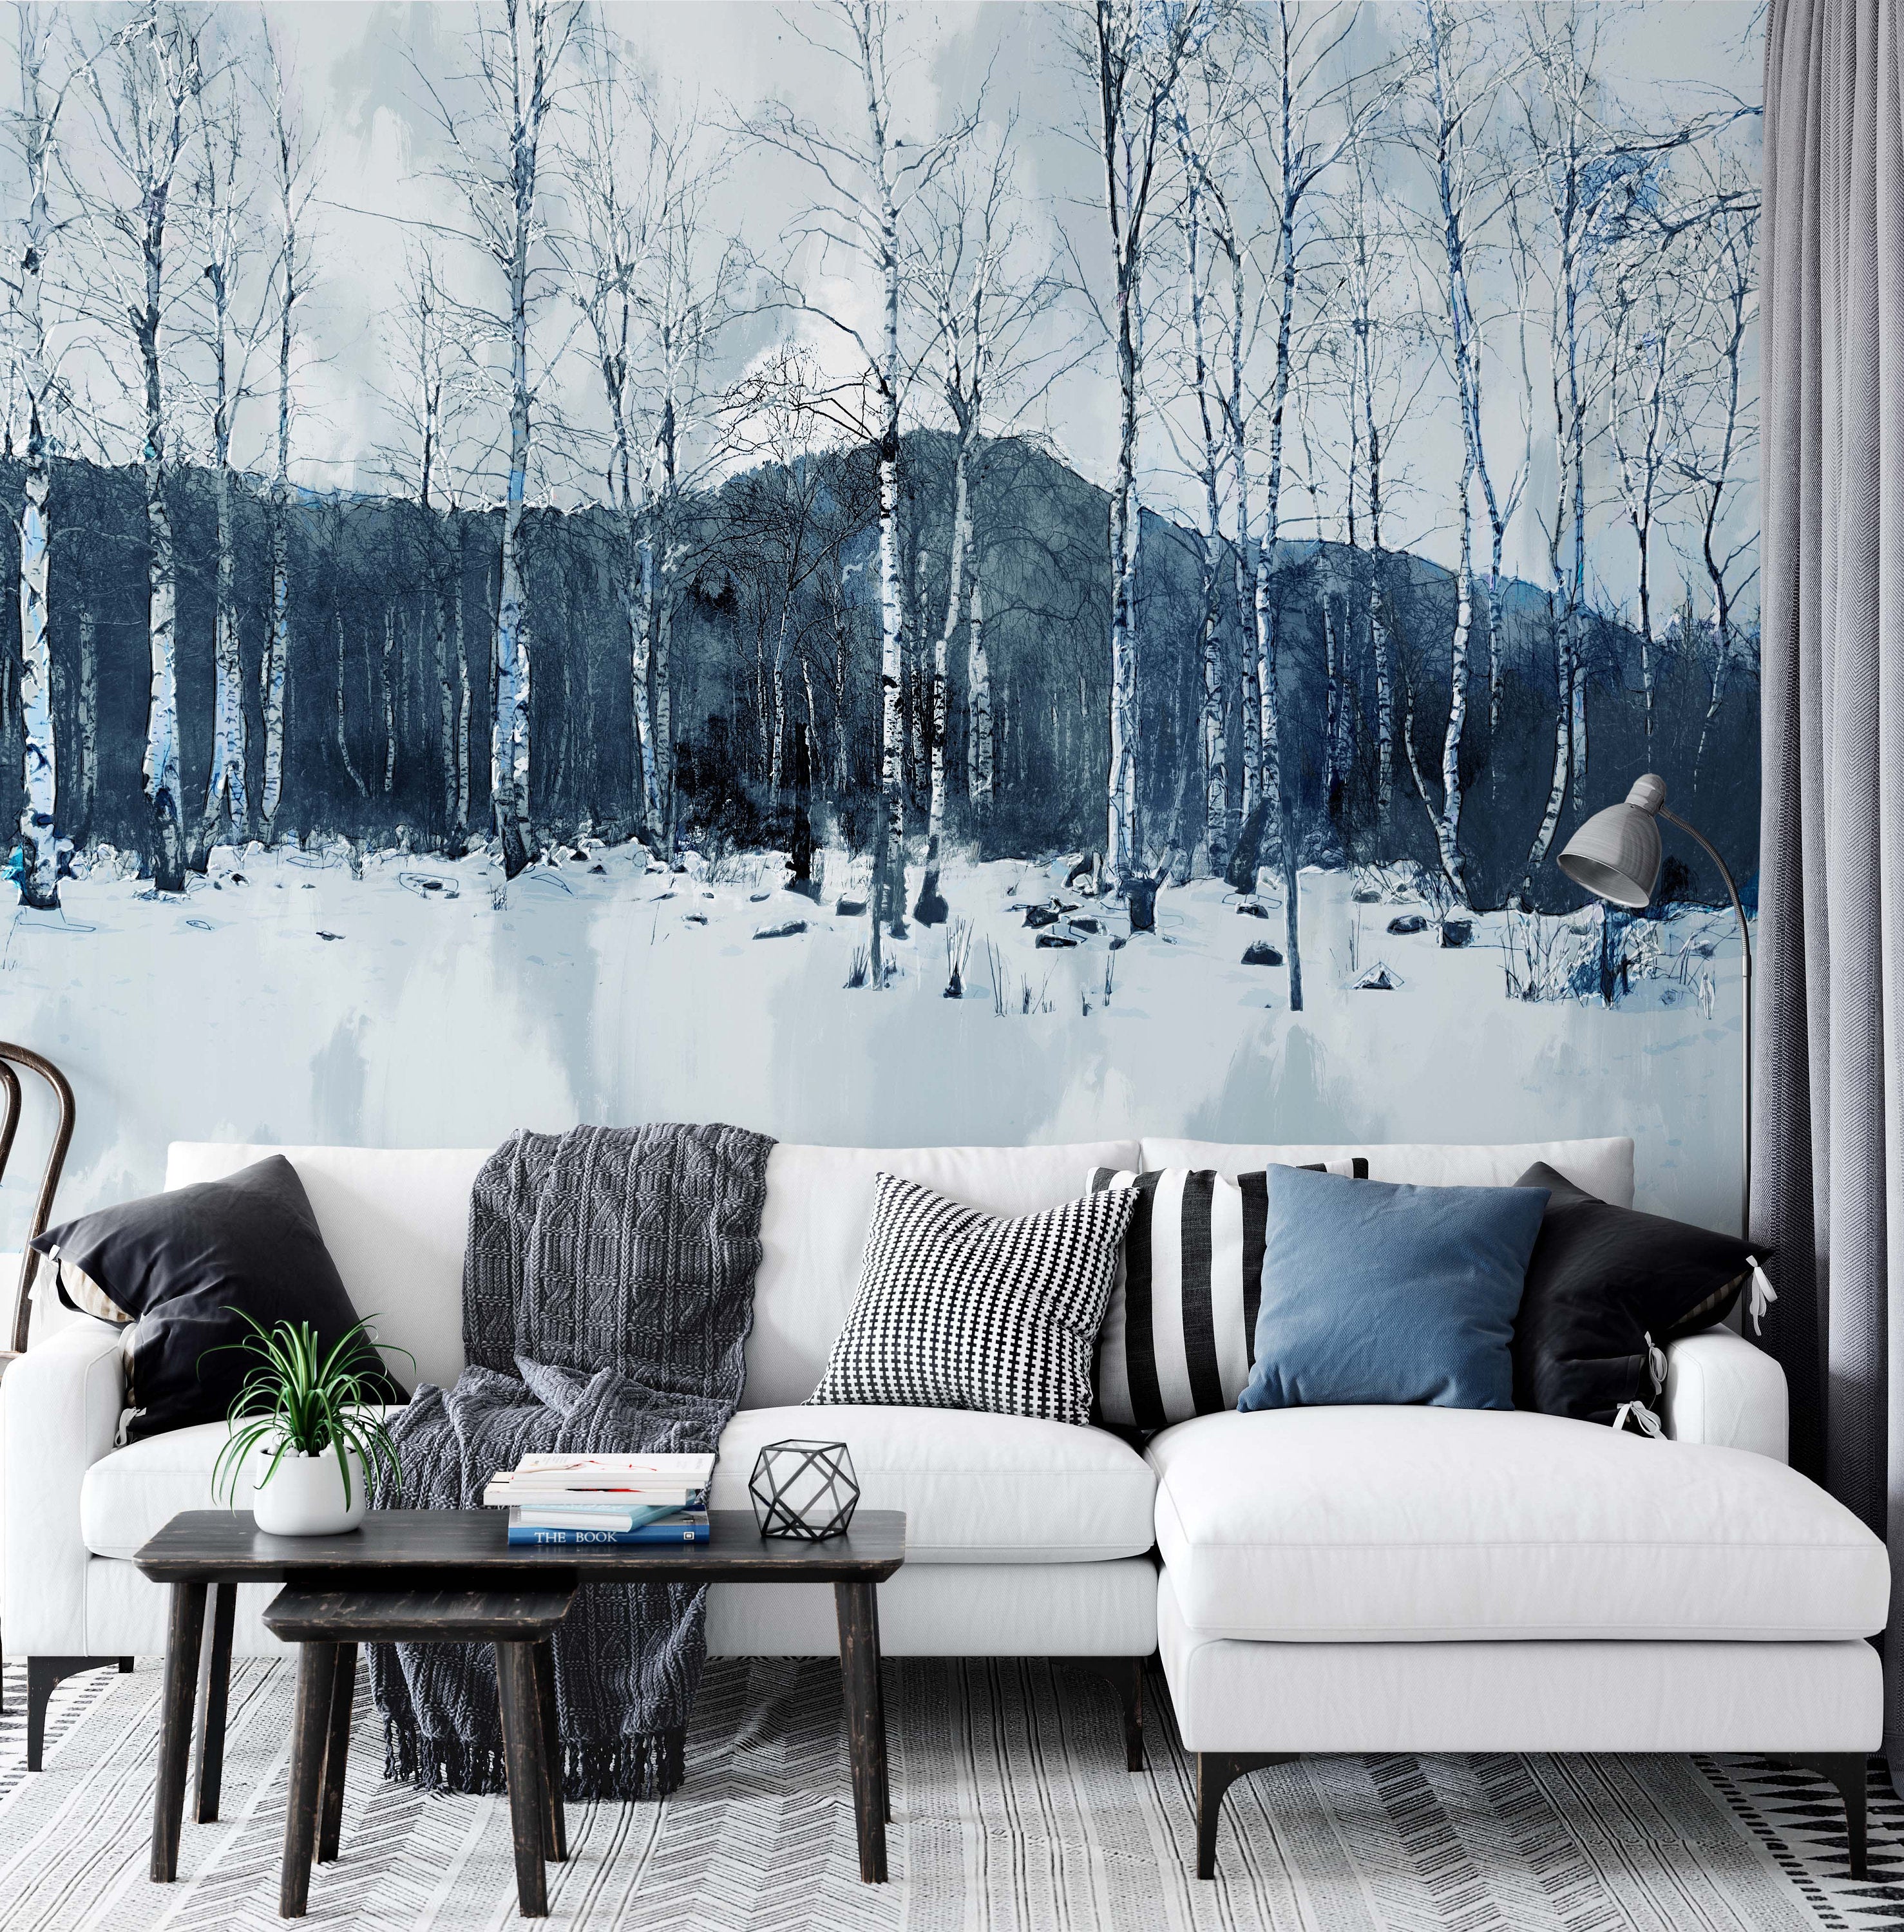 Abstract Trees in Winter Leaves Nature Wallpaper Cafe Restaurant Decoration Living Room Bedroom Wall Covering Mural Home Decor Art